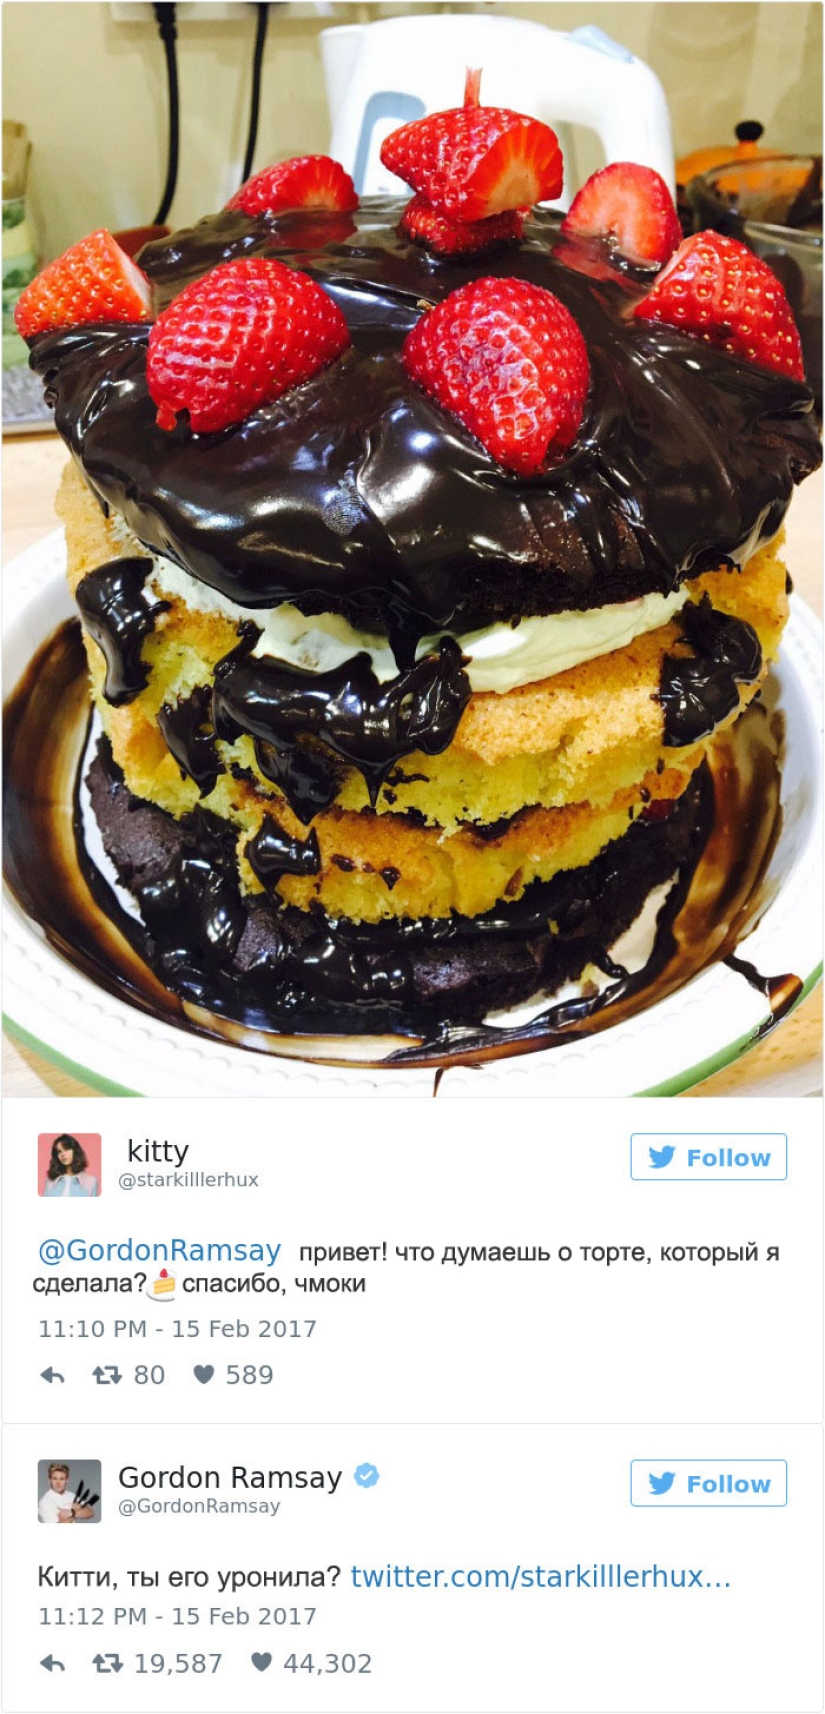 These people regretted that they decided to show their dishes on Twitter to chef Gordon Ramsay